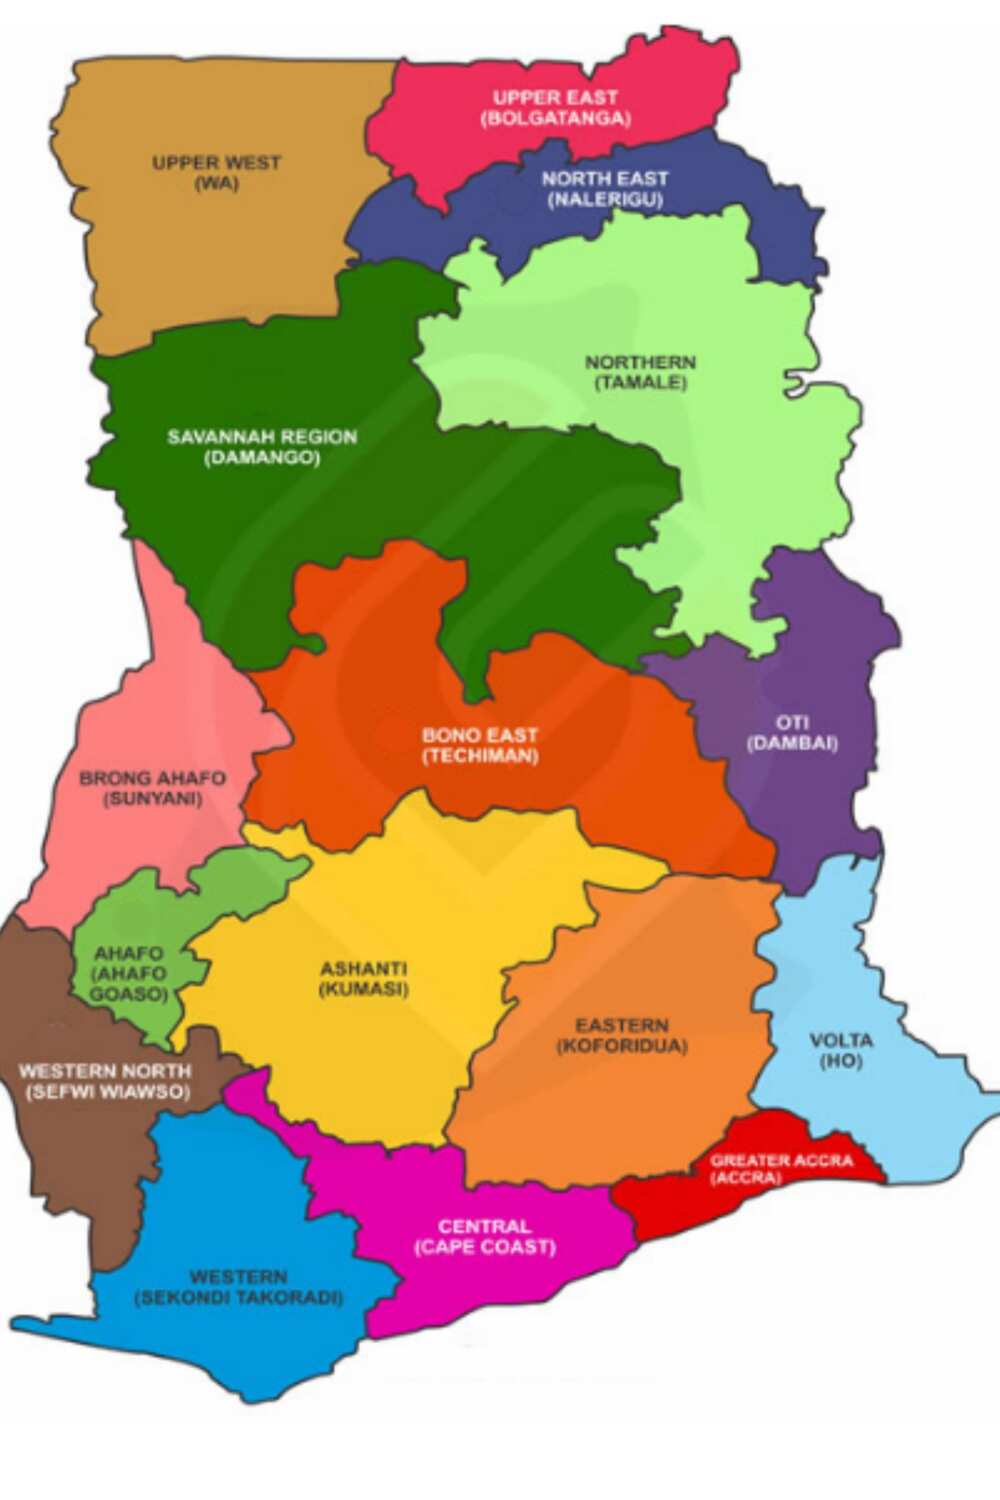 All 16 regions in Ghana and their capitals